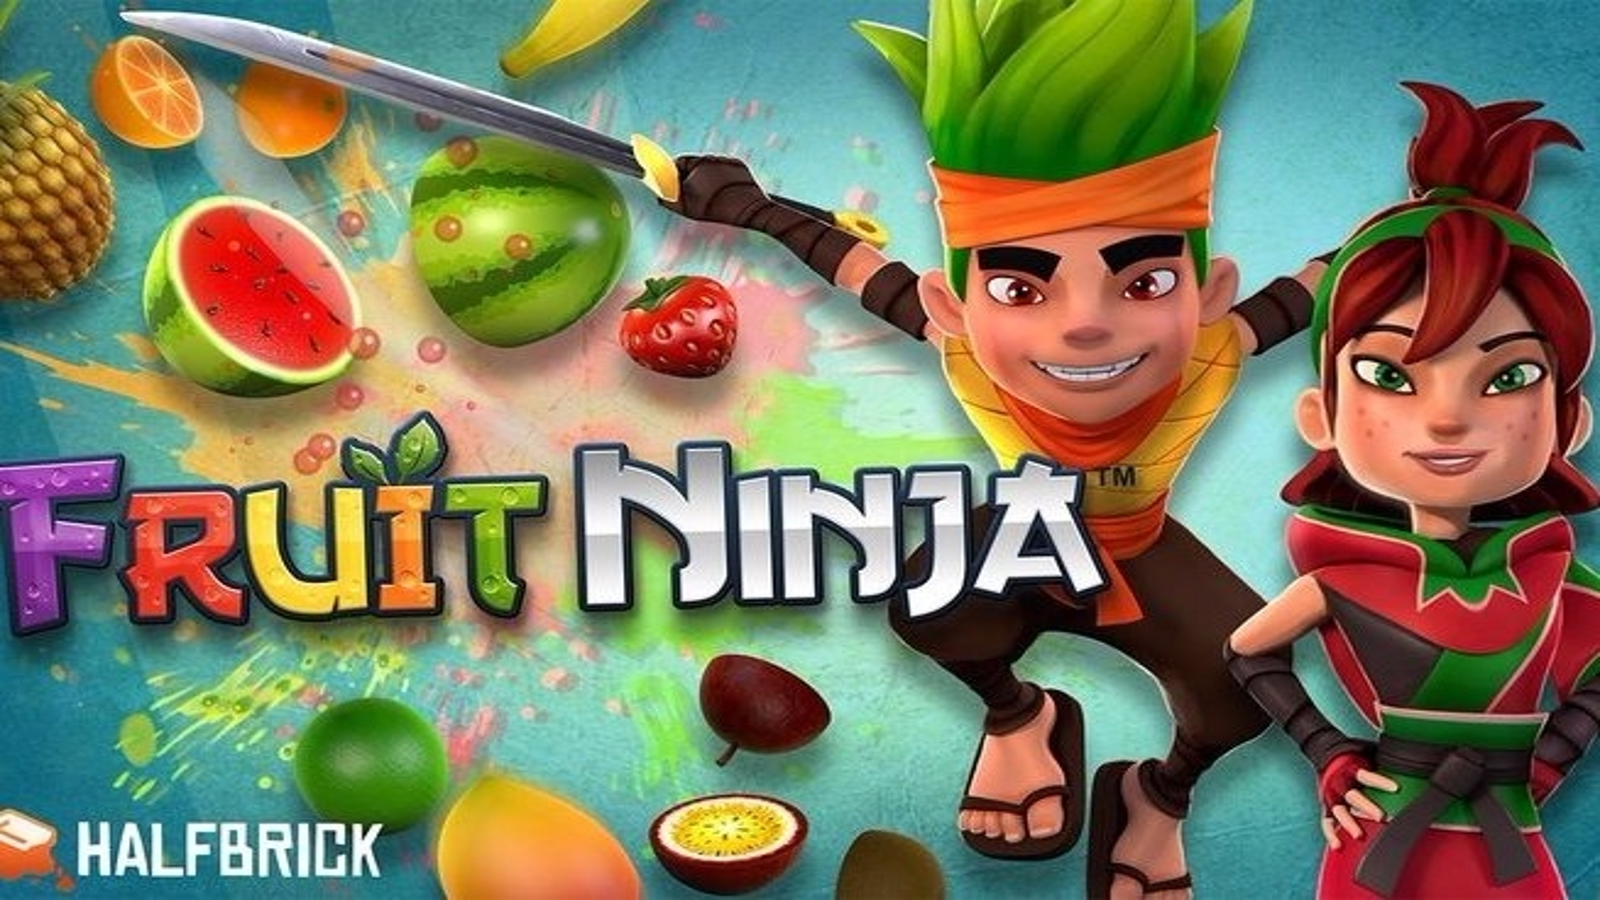 https://assetsio.reedpopcdn.com/fruit-ninja-is-being-made-into-a-movie-1463781914040.jpg?width=1600&height=900&fit=crop&quality=100&format=png&enable=upscale&auto=webp